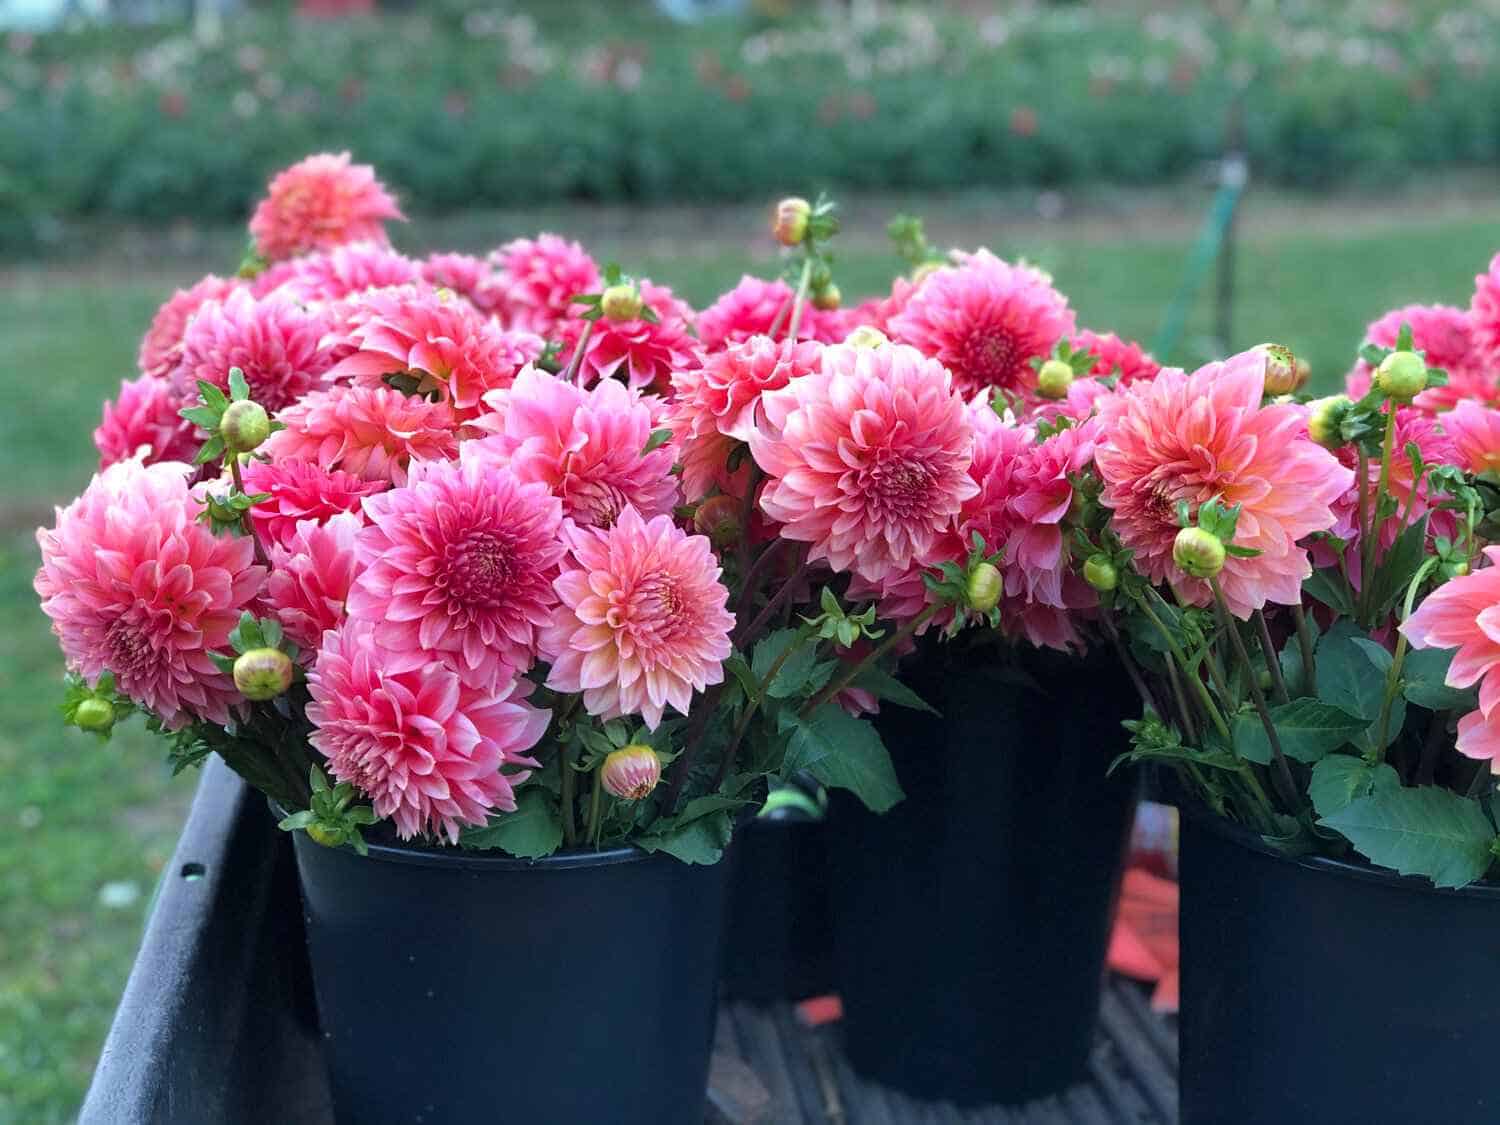 pink flowers with green foilage